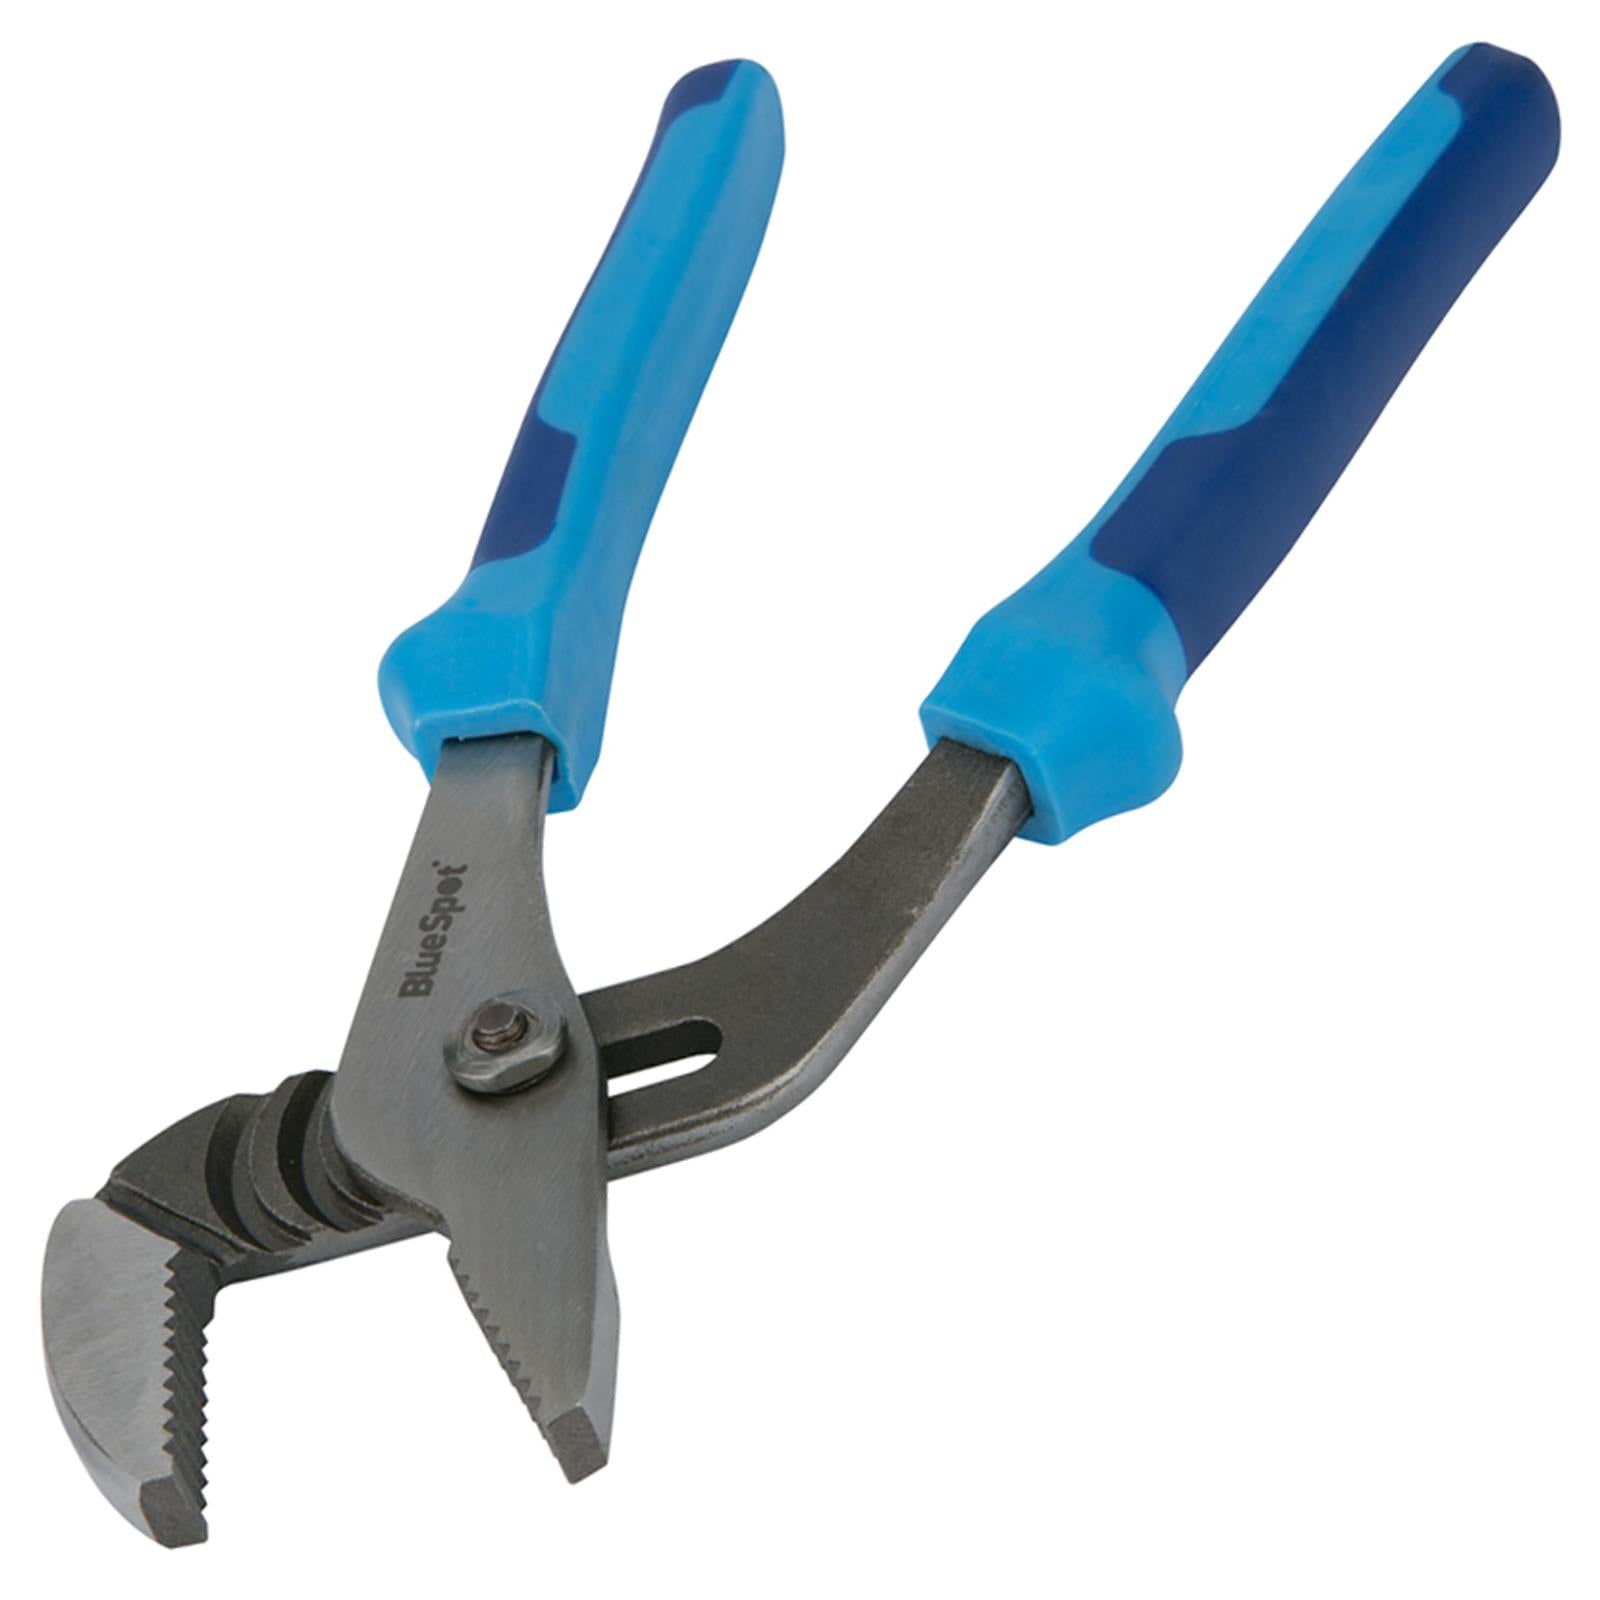 BlueSpot Water Pump Pliers Groove Joint  250mm 10" 32mm Jaw Capacity